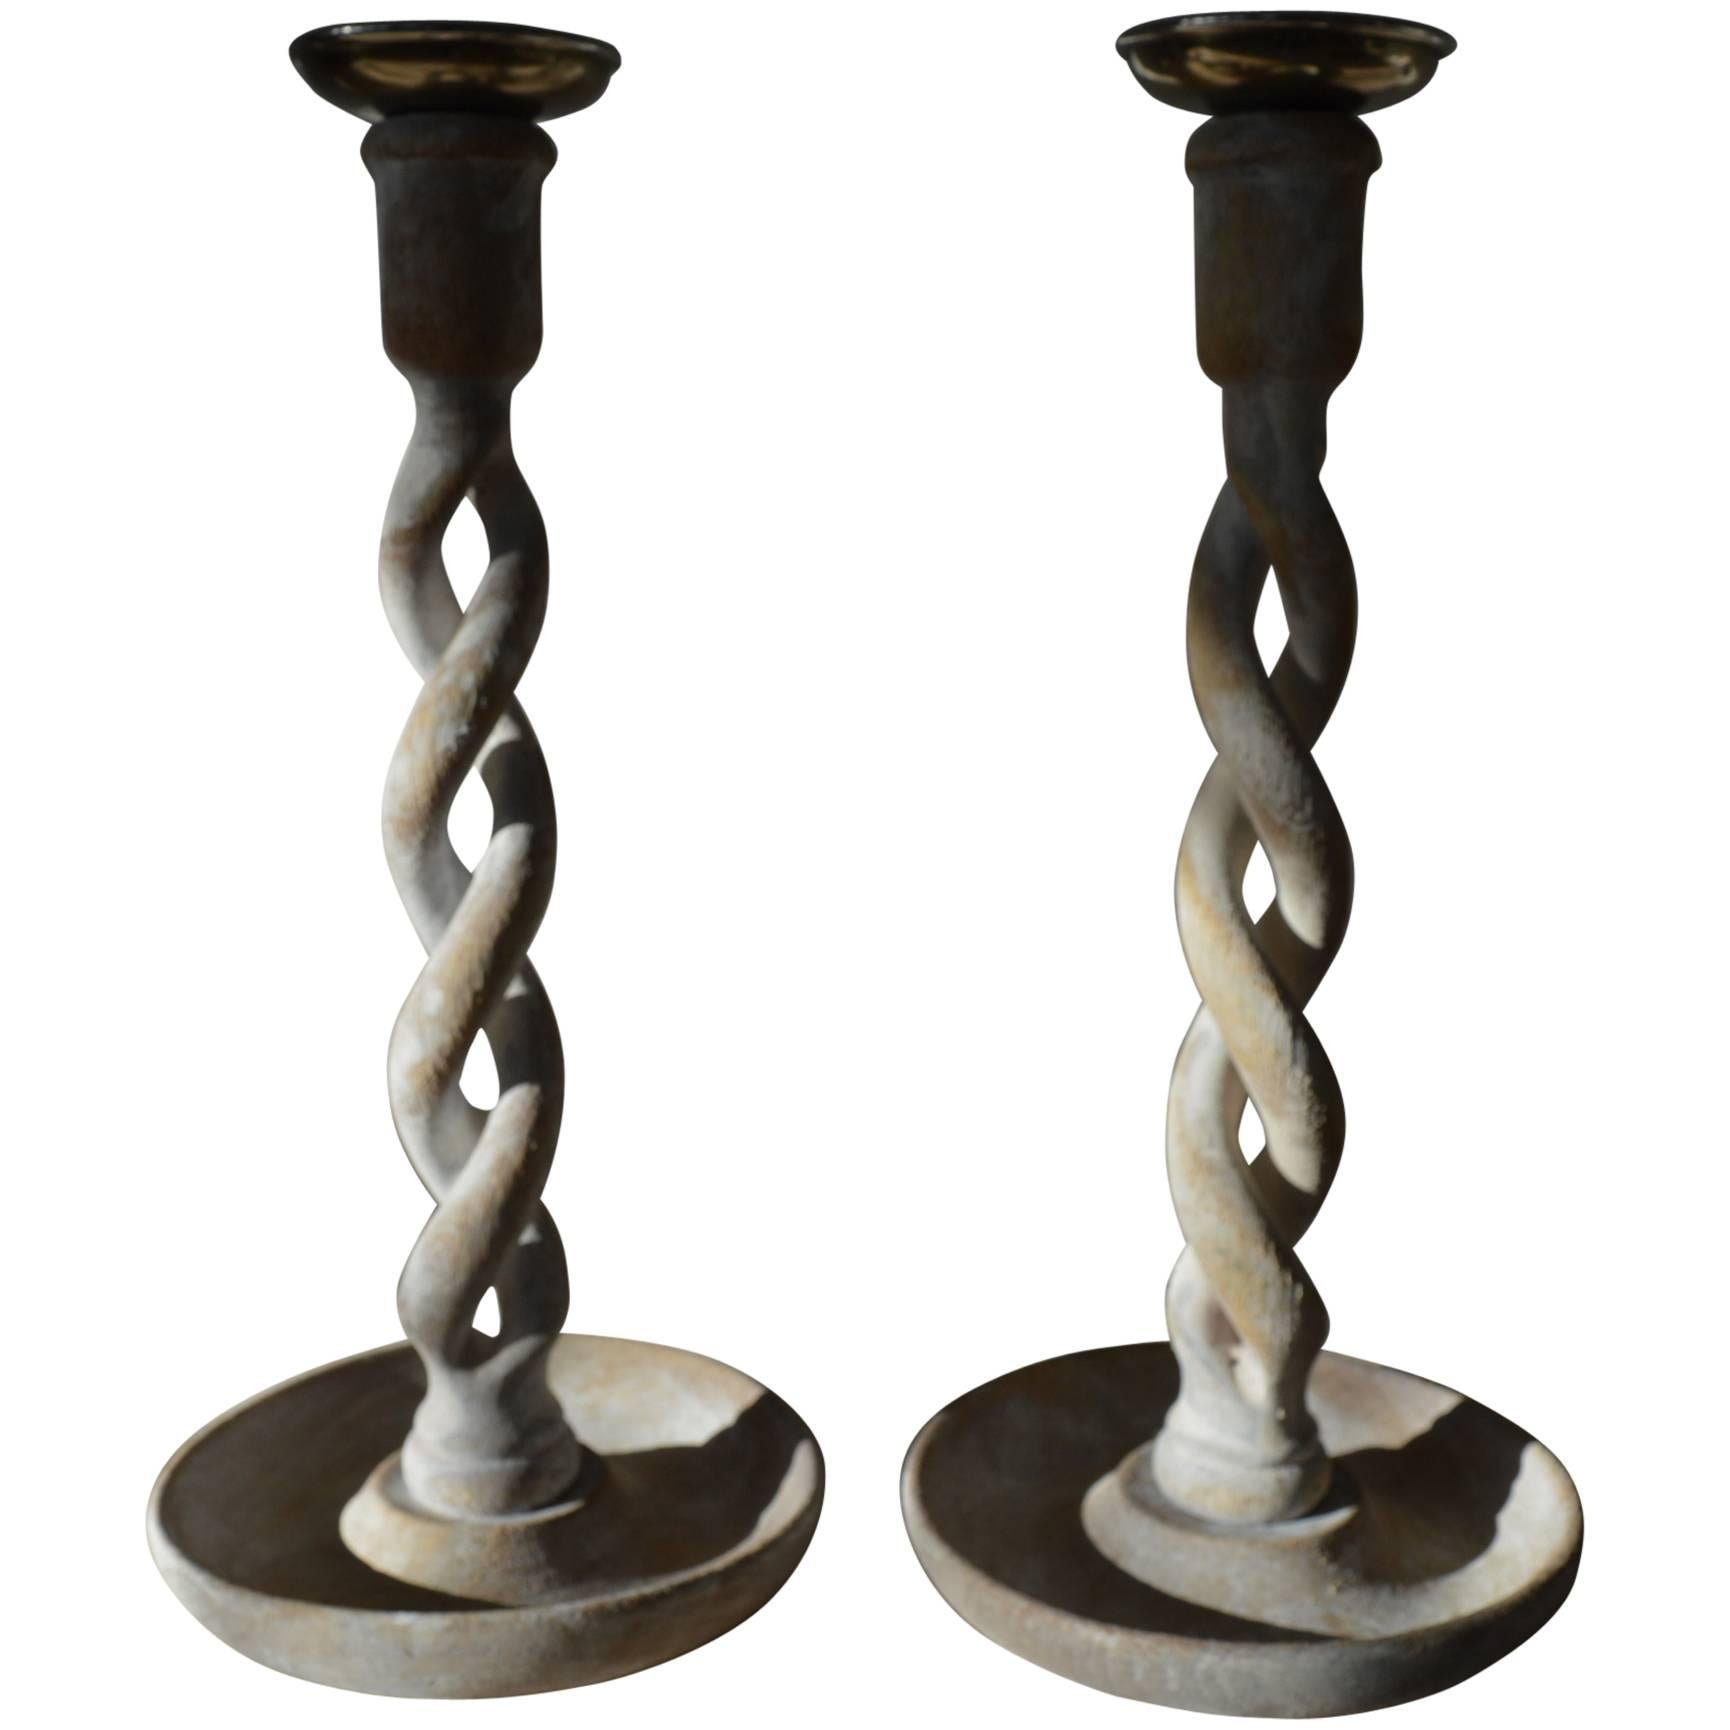 Pair of Antique Limed Oak Open Twisted Candlesticks. English, circa 1920